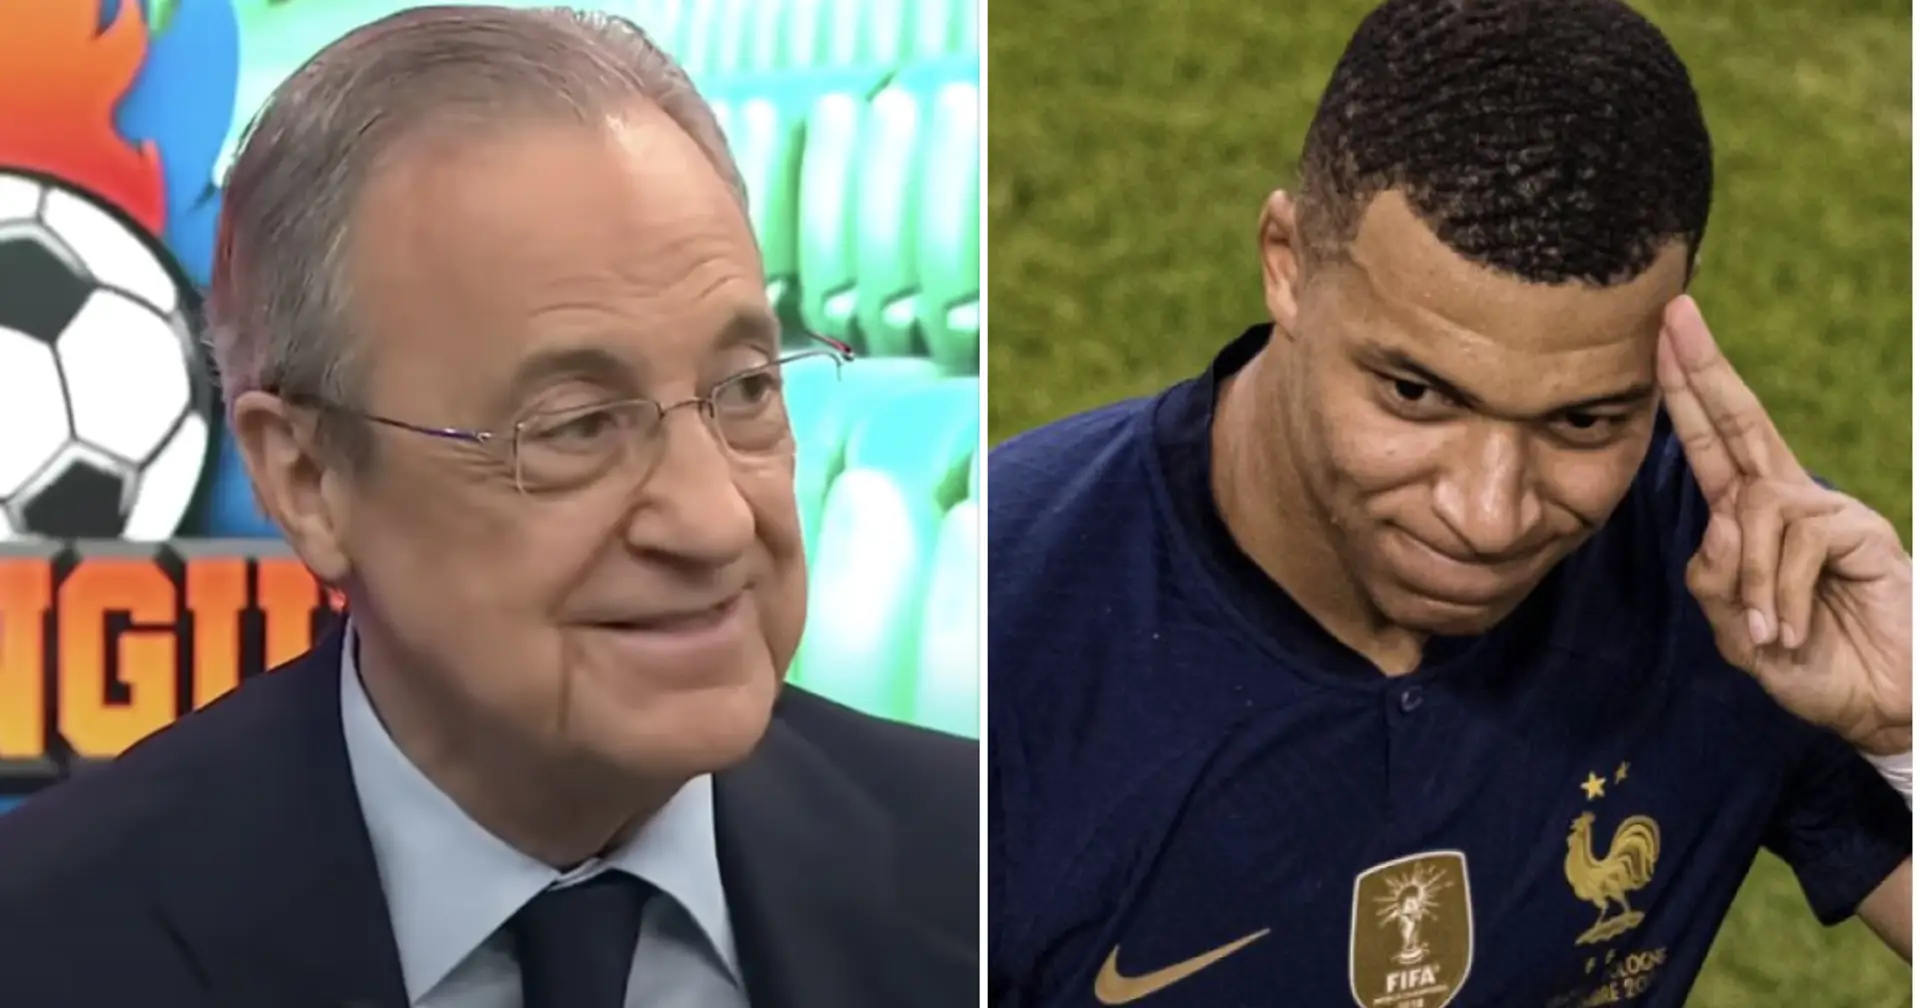 Perez asked if Madrid will sign more players this summer, president's answer caught on camera